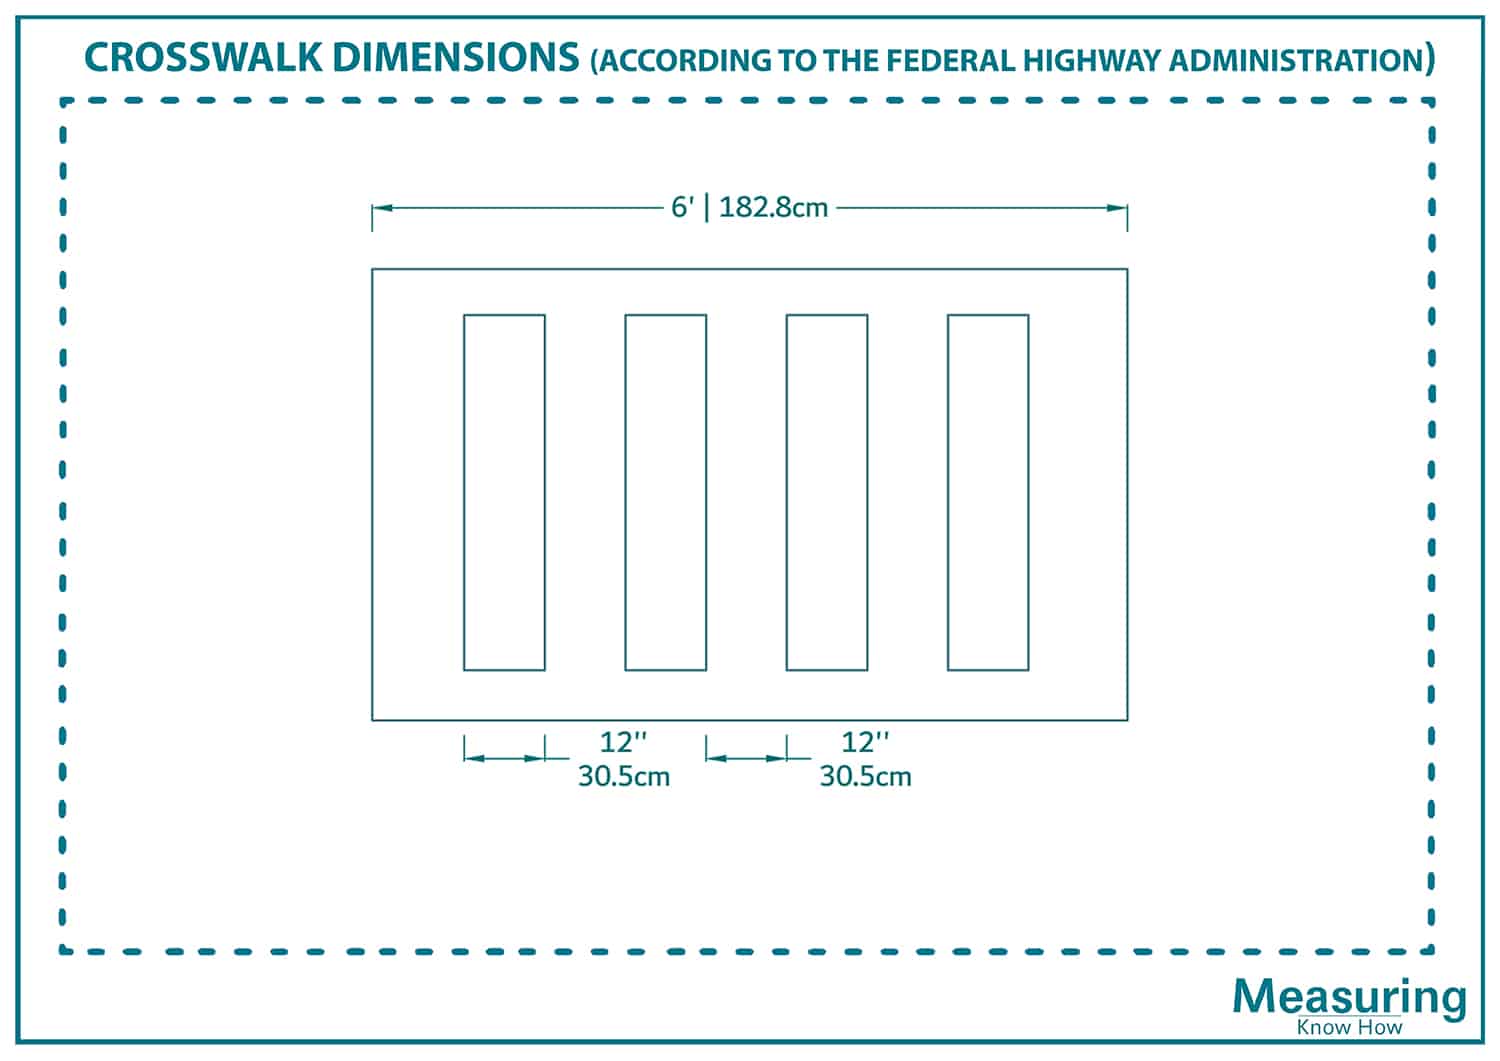 Crosswalk dimensions According to the Federal Highway Administration